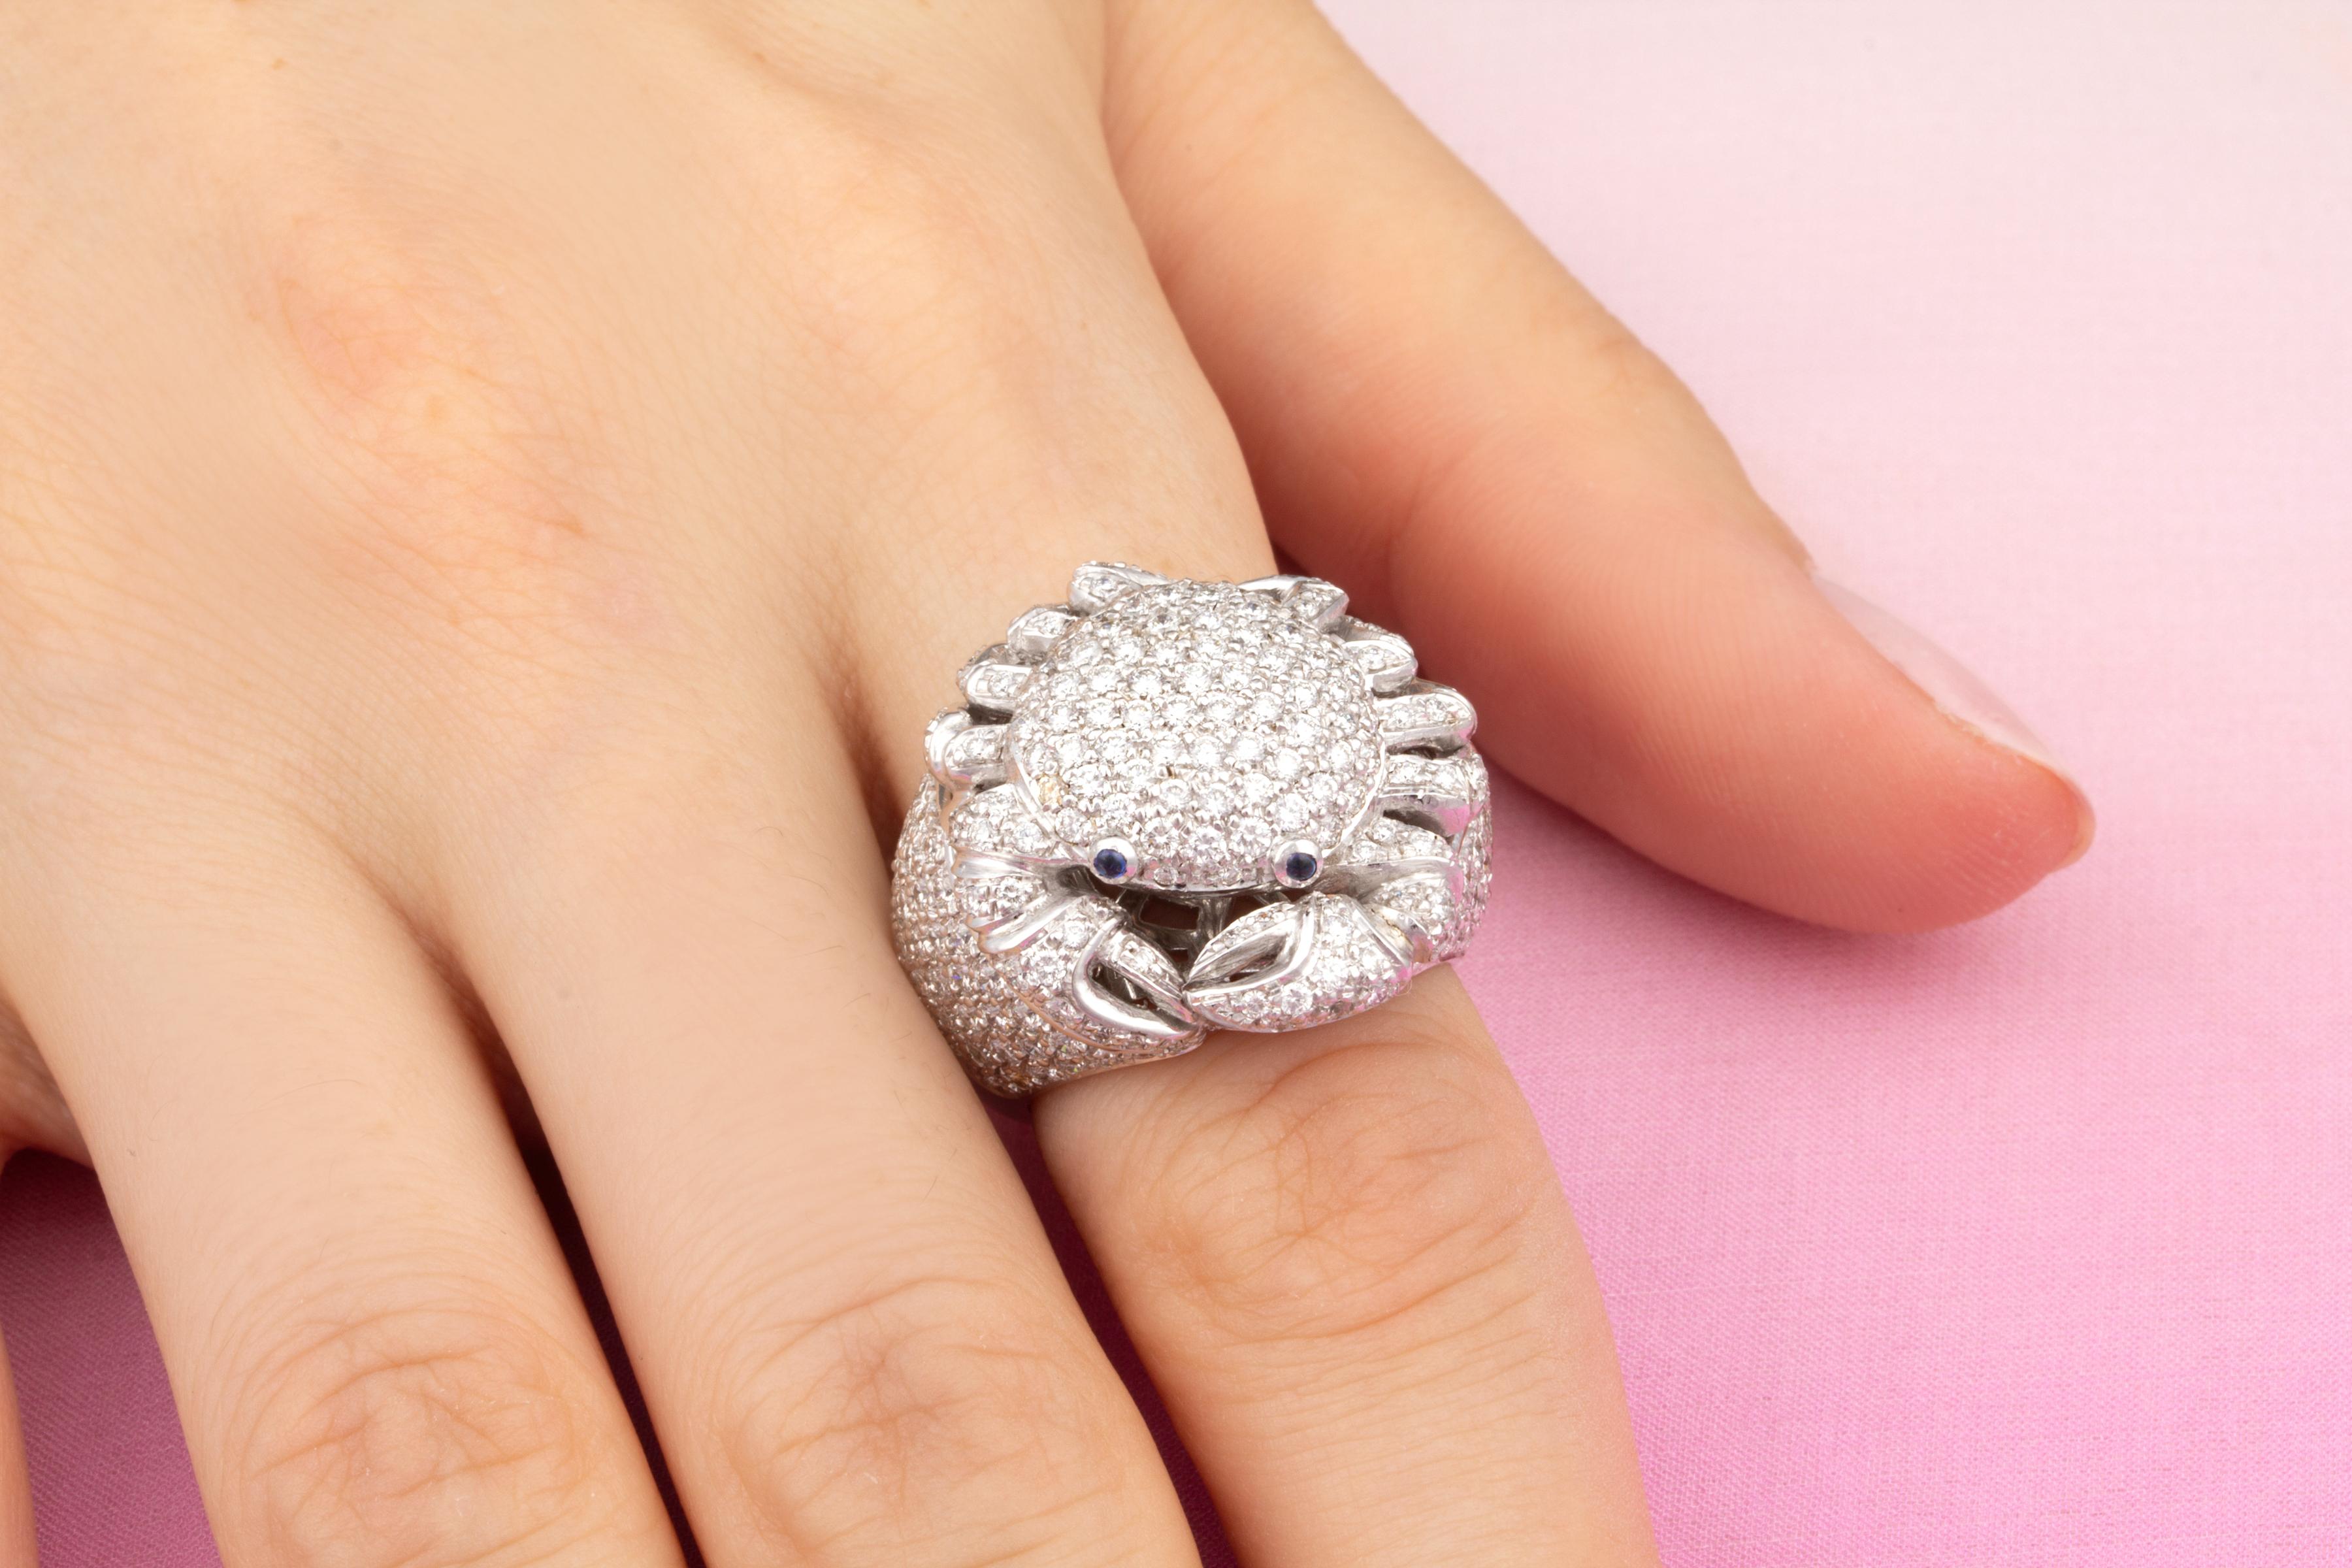 tortoise ring in which finger for male astrology